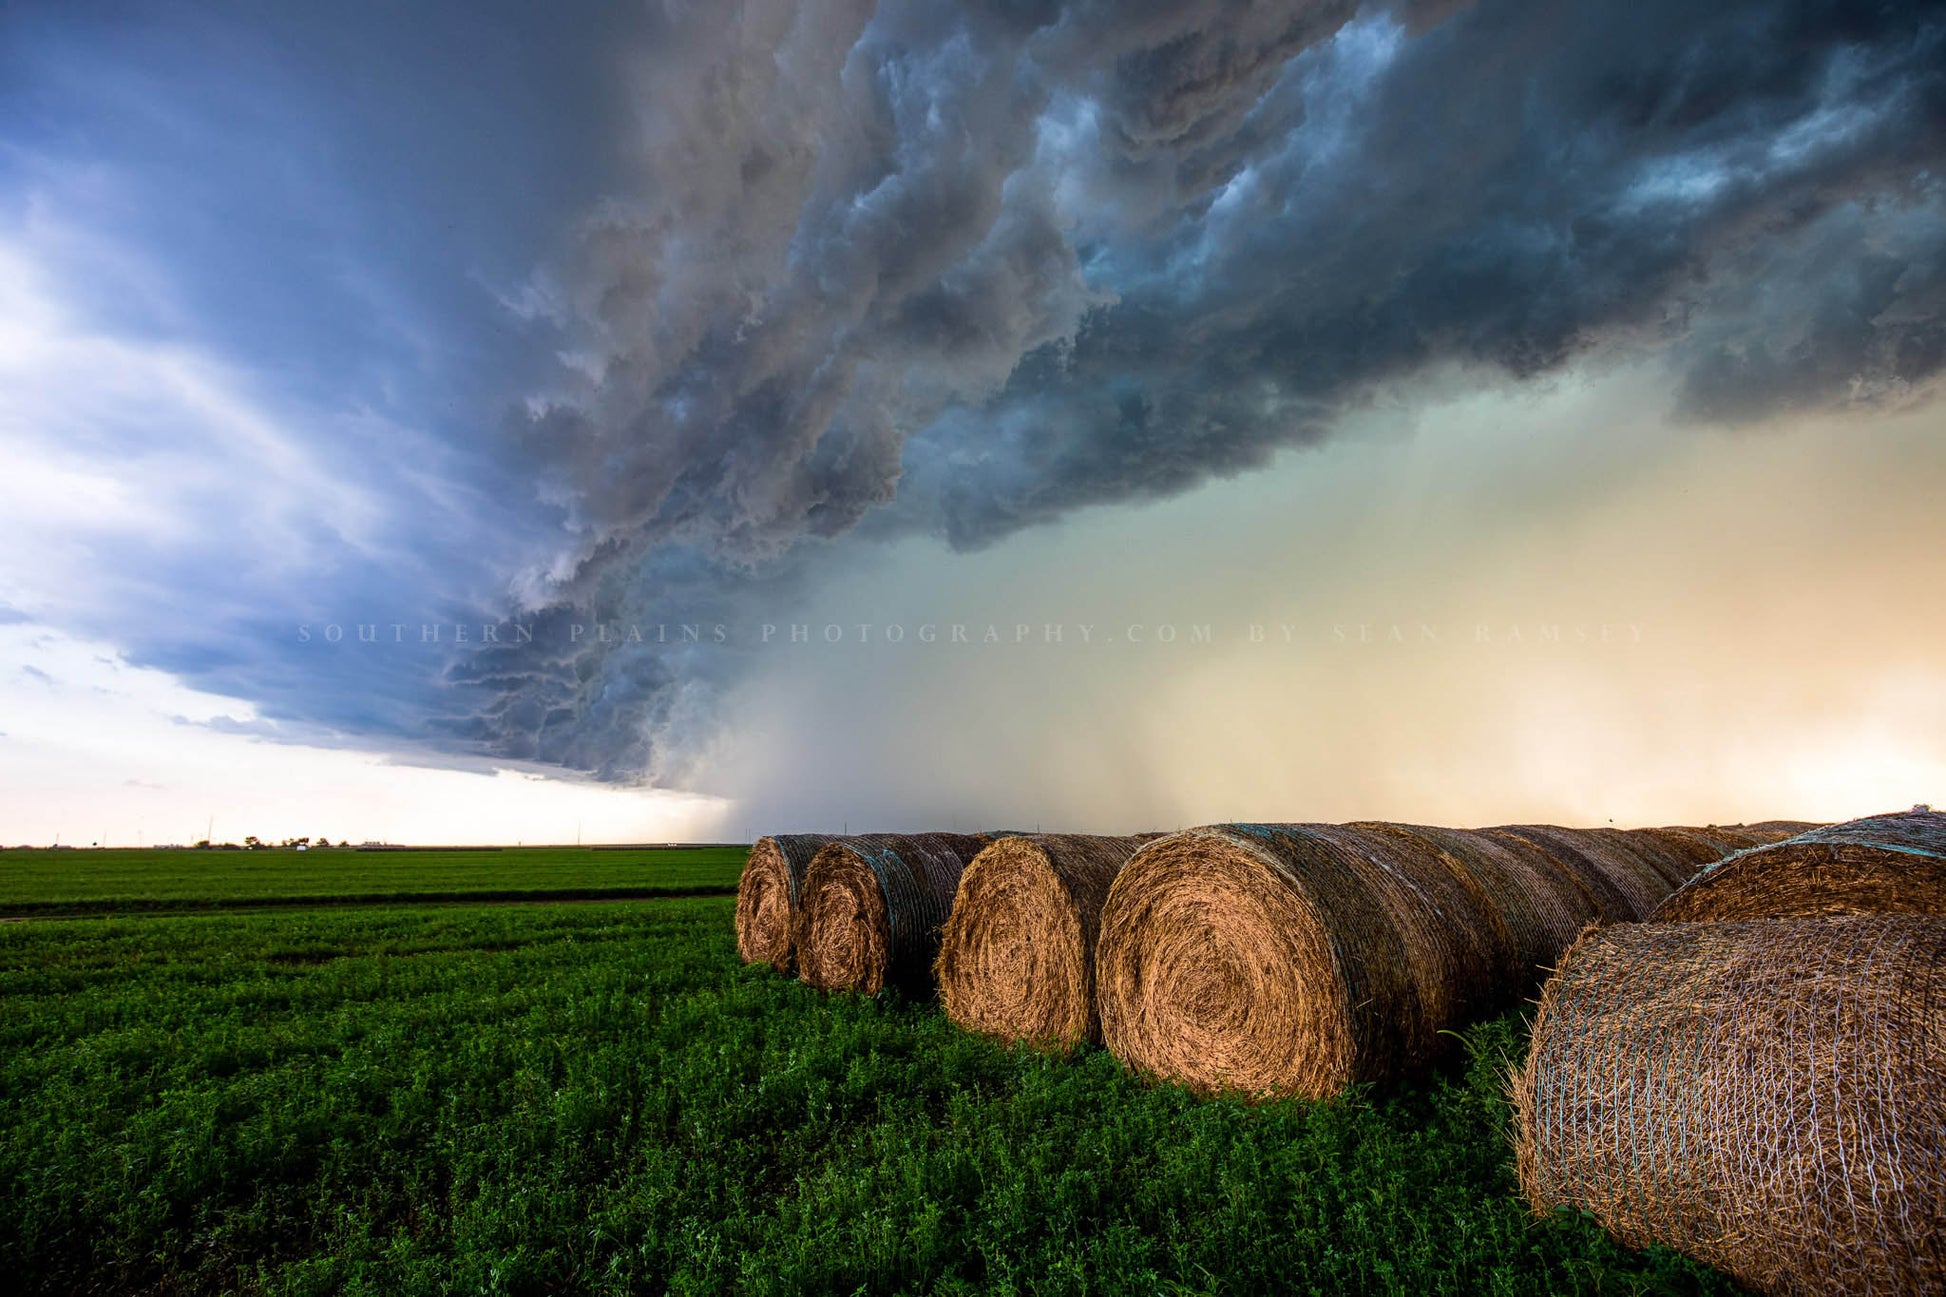 Country photography print of a powerful thunderstorm advancing over round hay bales on a stormy autumn day in Kansas by Sean Ramsey of Southern Plains Photography.